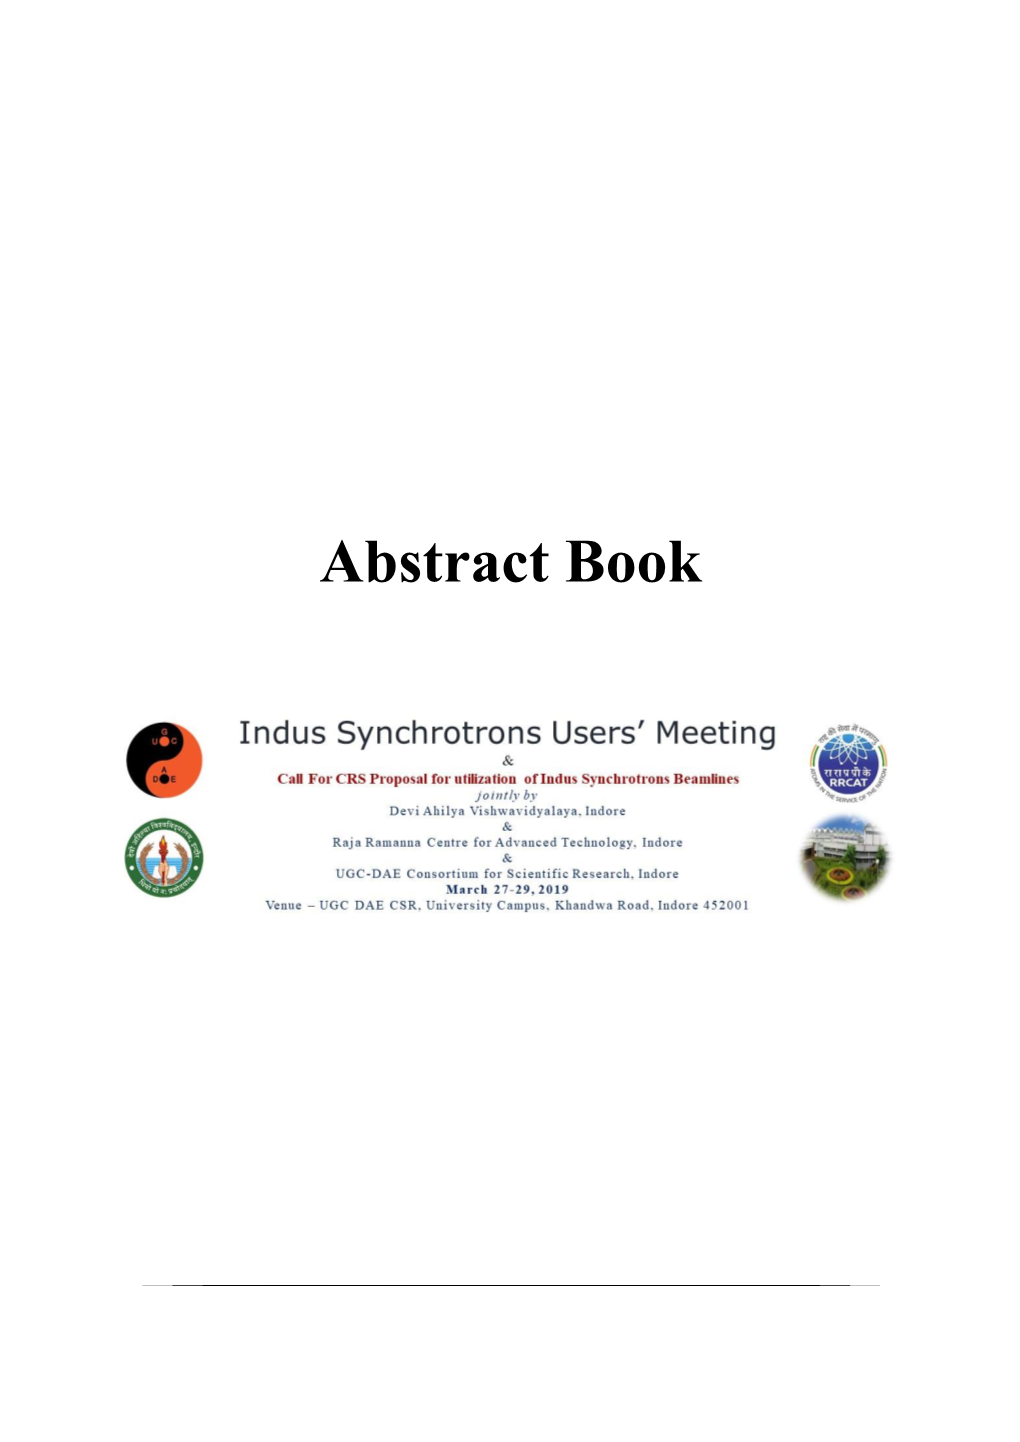 Indus Synchrotrons Users' Meeting (ISUM) March 27-29, 2019